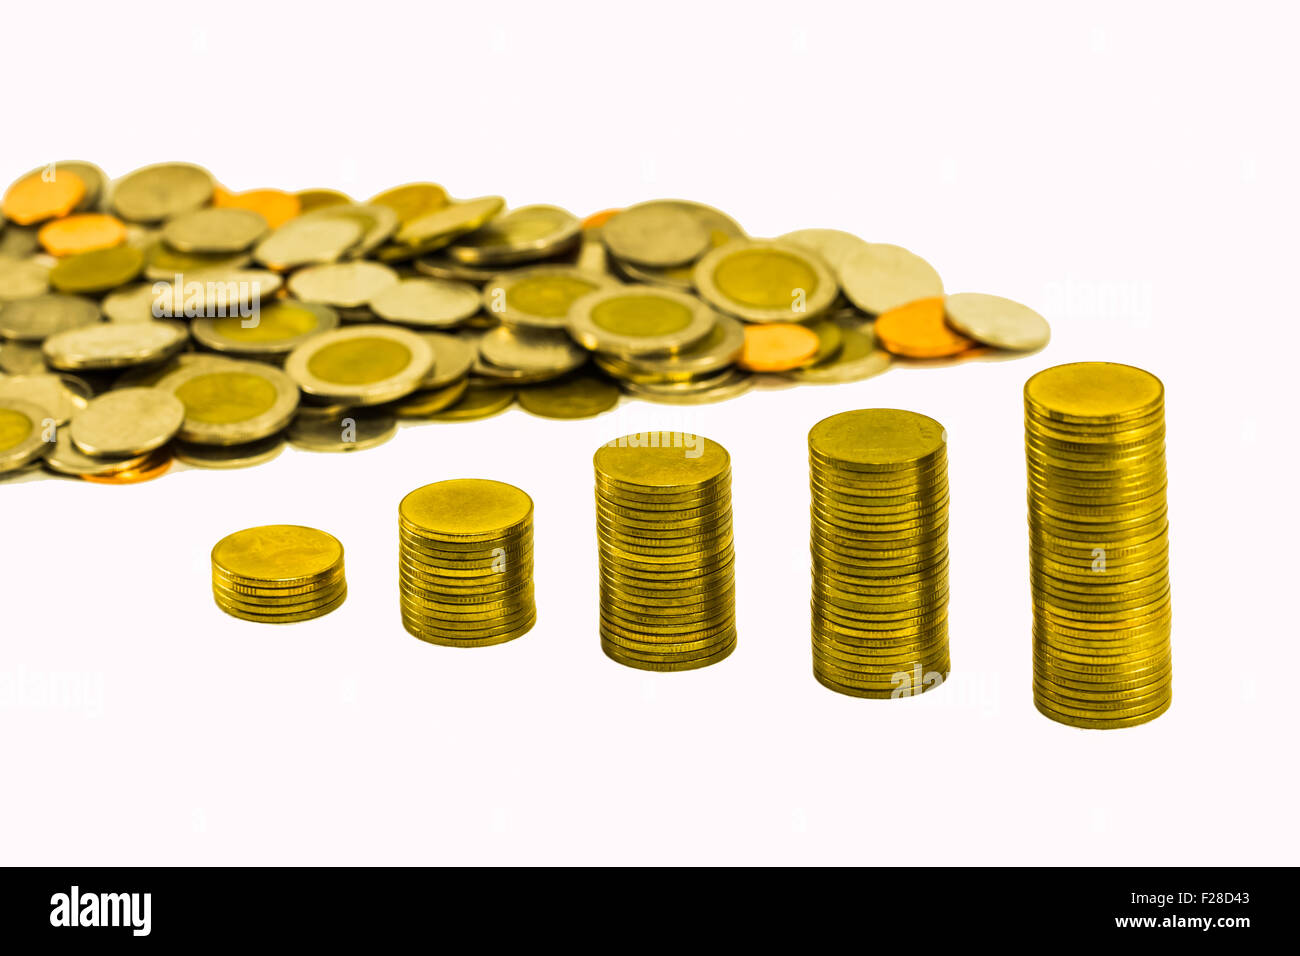 Pile of golden coins graph and pile of coins. Stock Photo